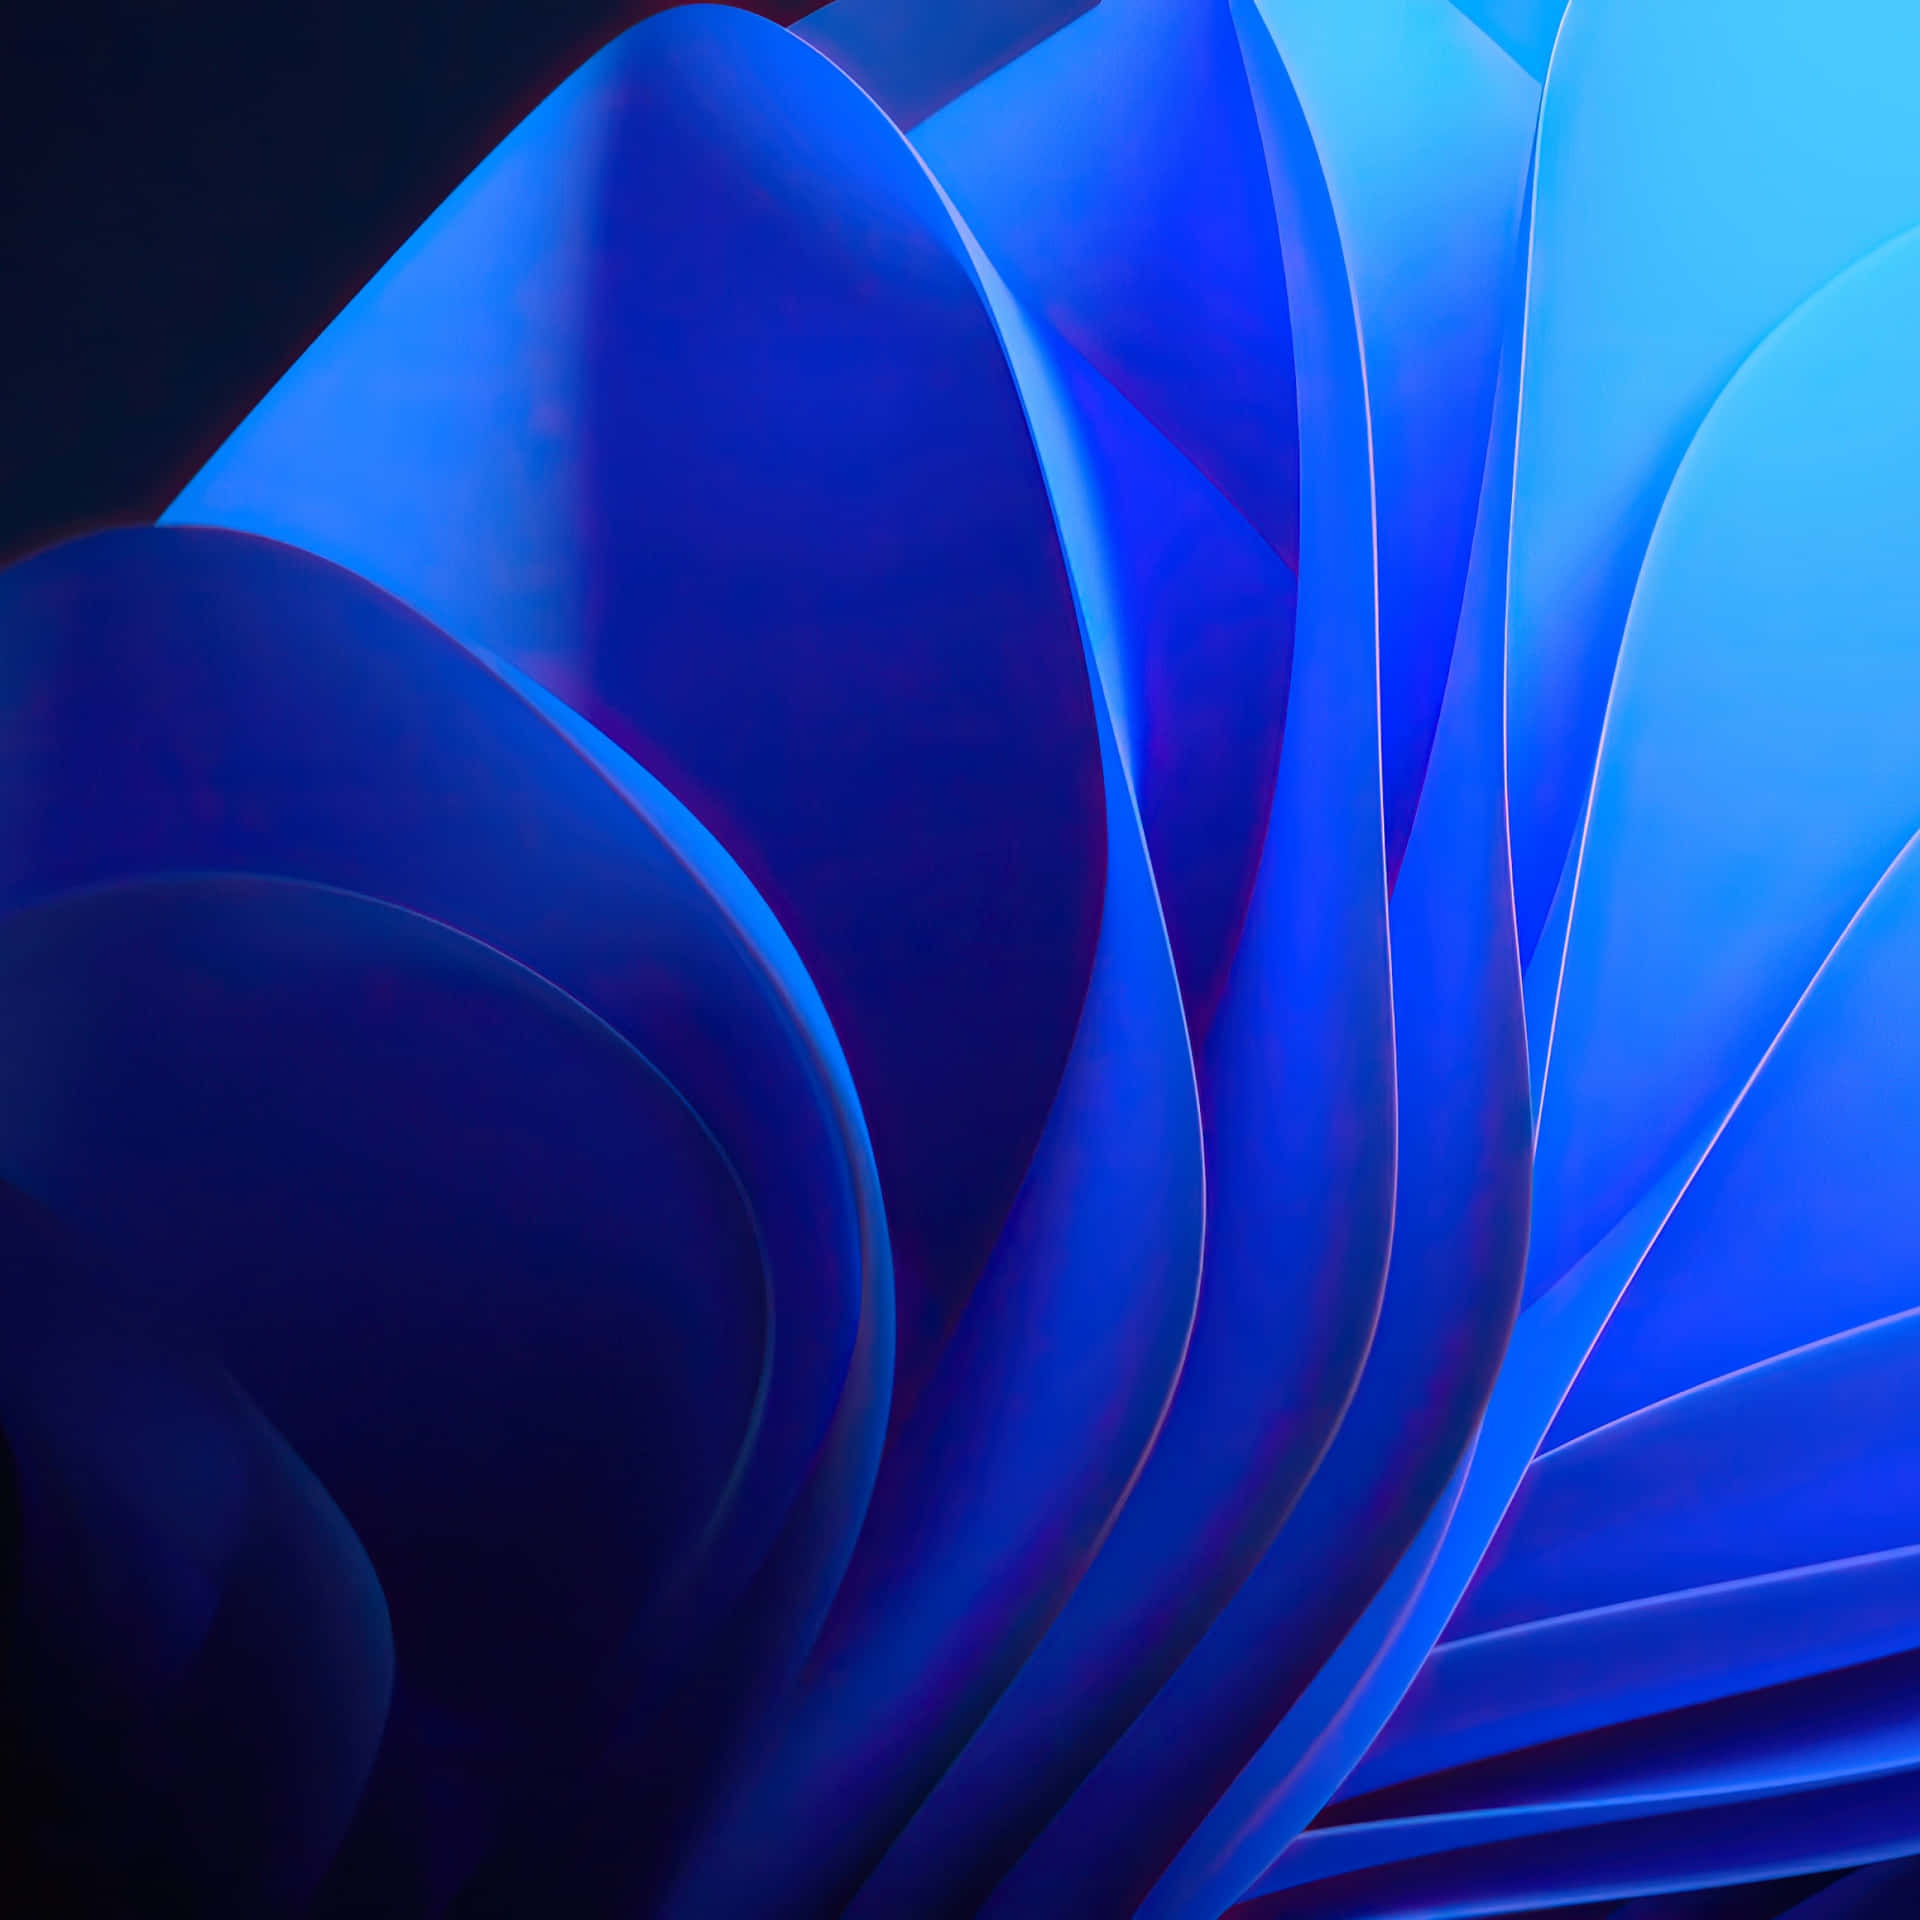 15 Azure Blue Wallpapers For Phone : Gradient Azure Blue 1 - Fab